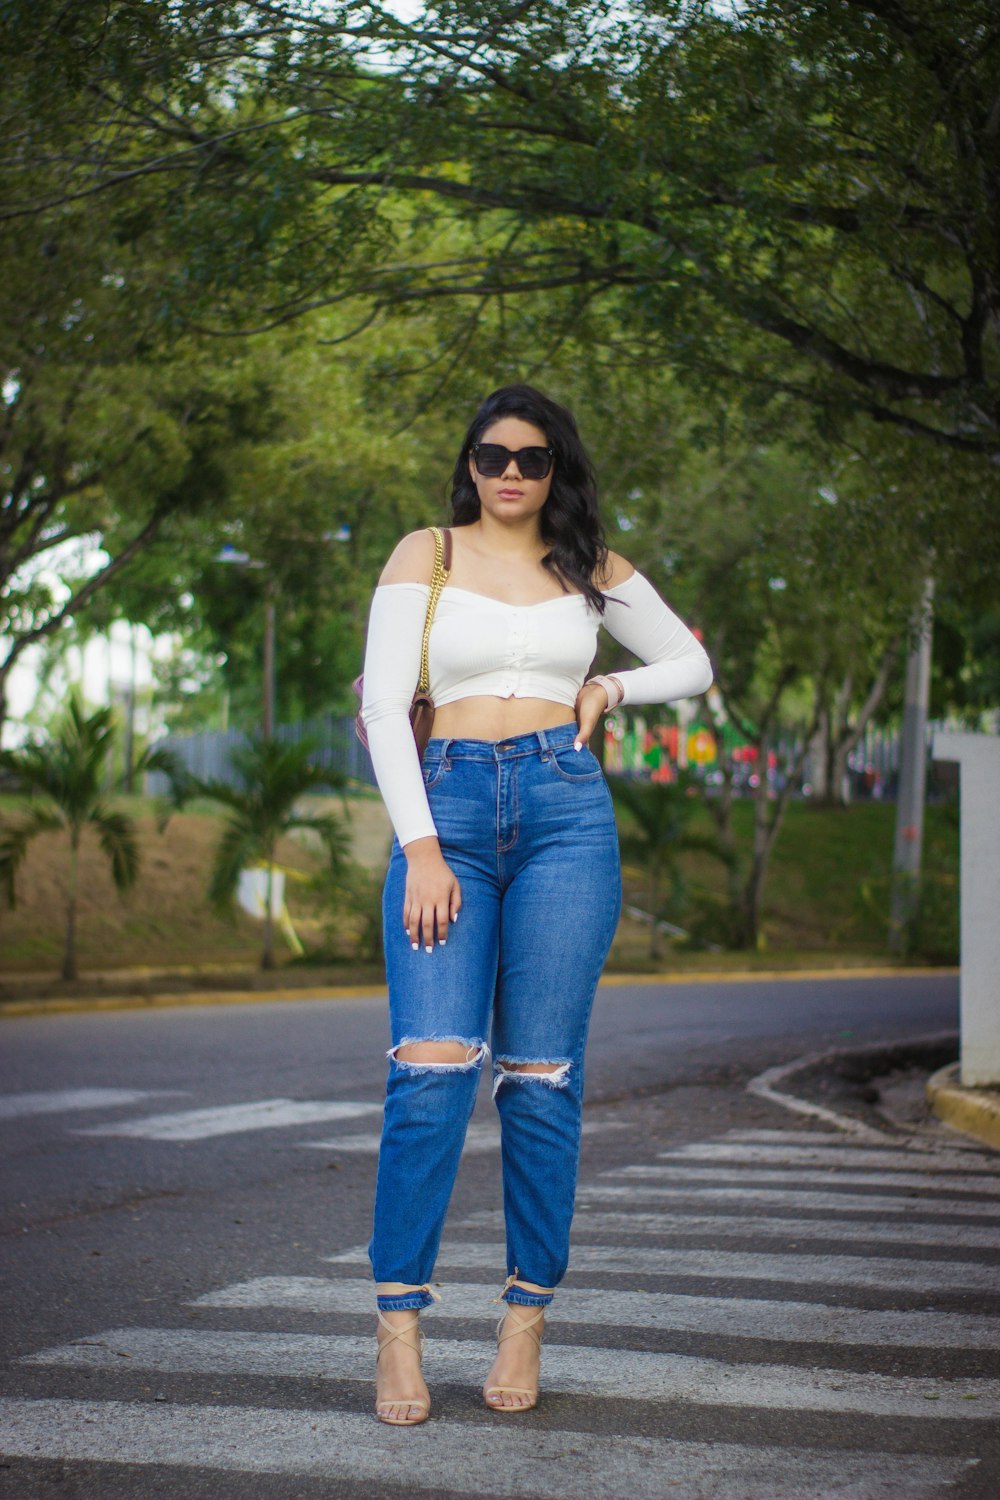 woman in white spaghetti strap top and blue denim jeans standing on road during daytime